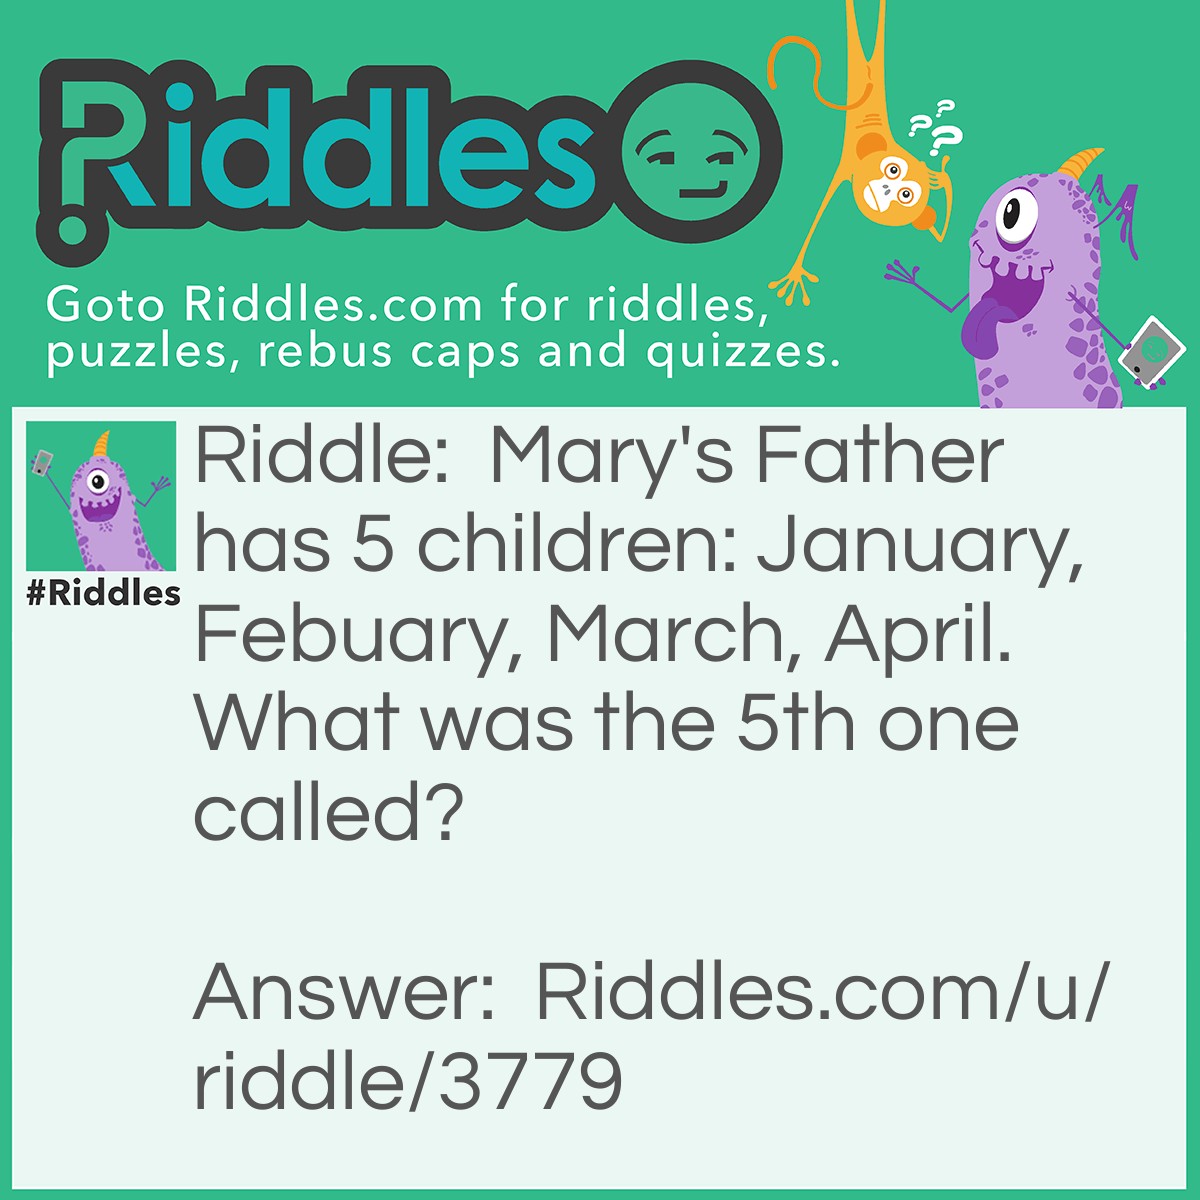 Riddle: Mary's Father has 5 children: January, Febuary, March, April. What was the 5th one called? Answer: Mary!!